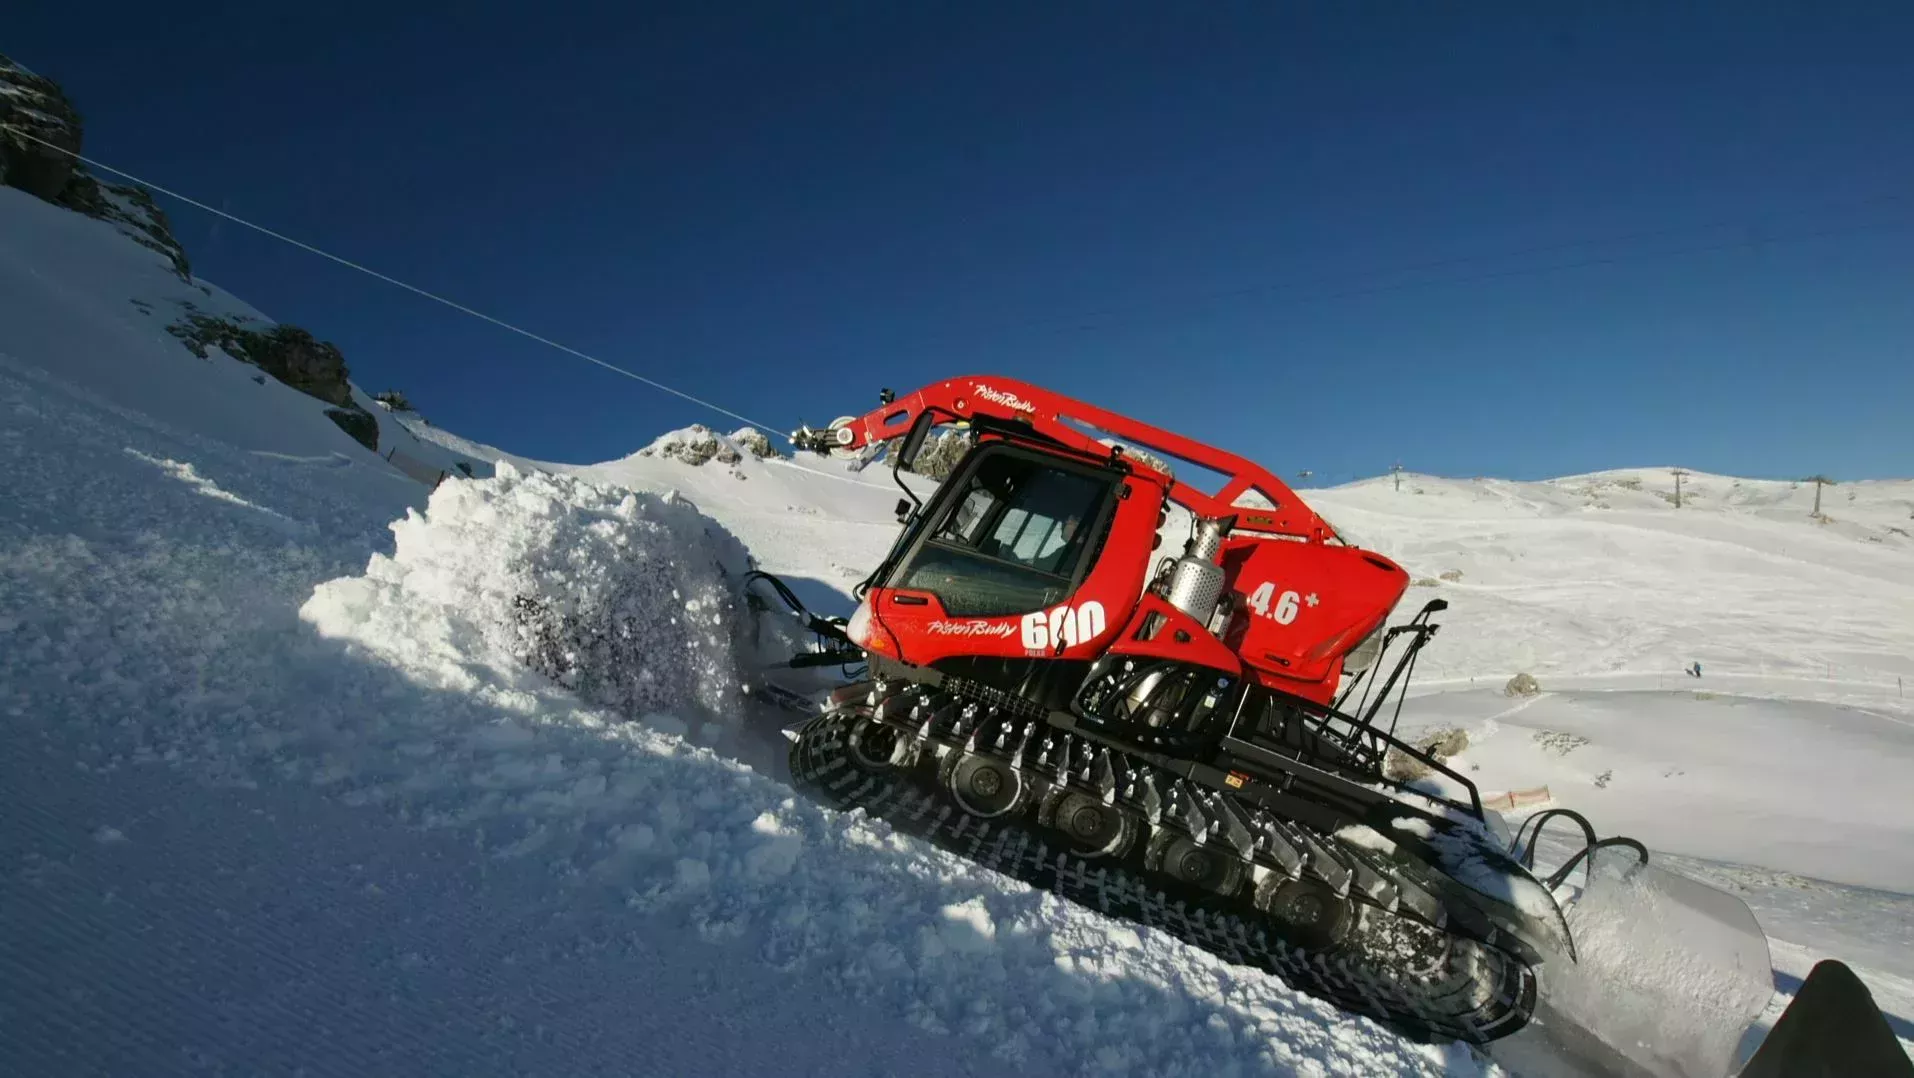 PistenBully 600 with winch